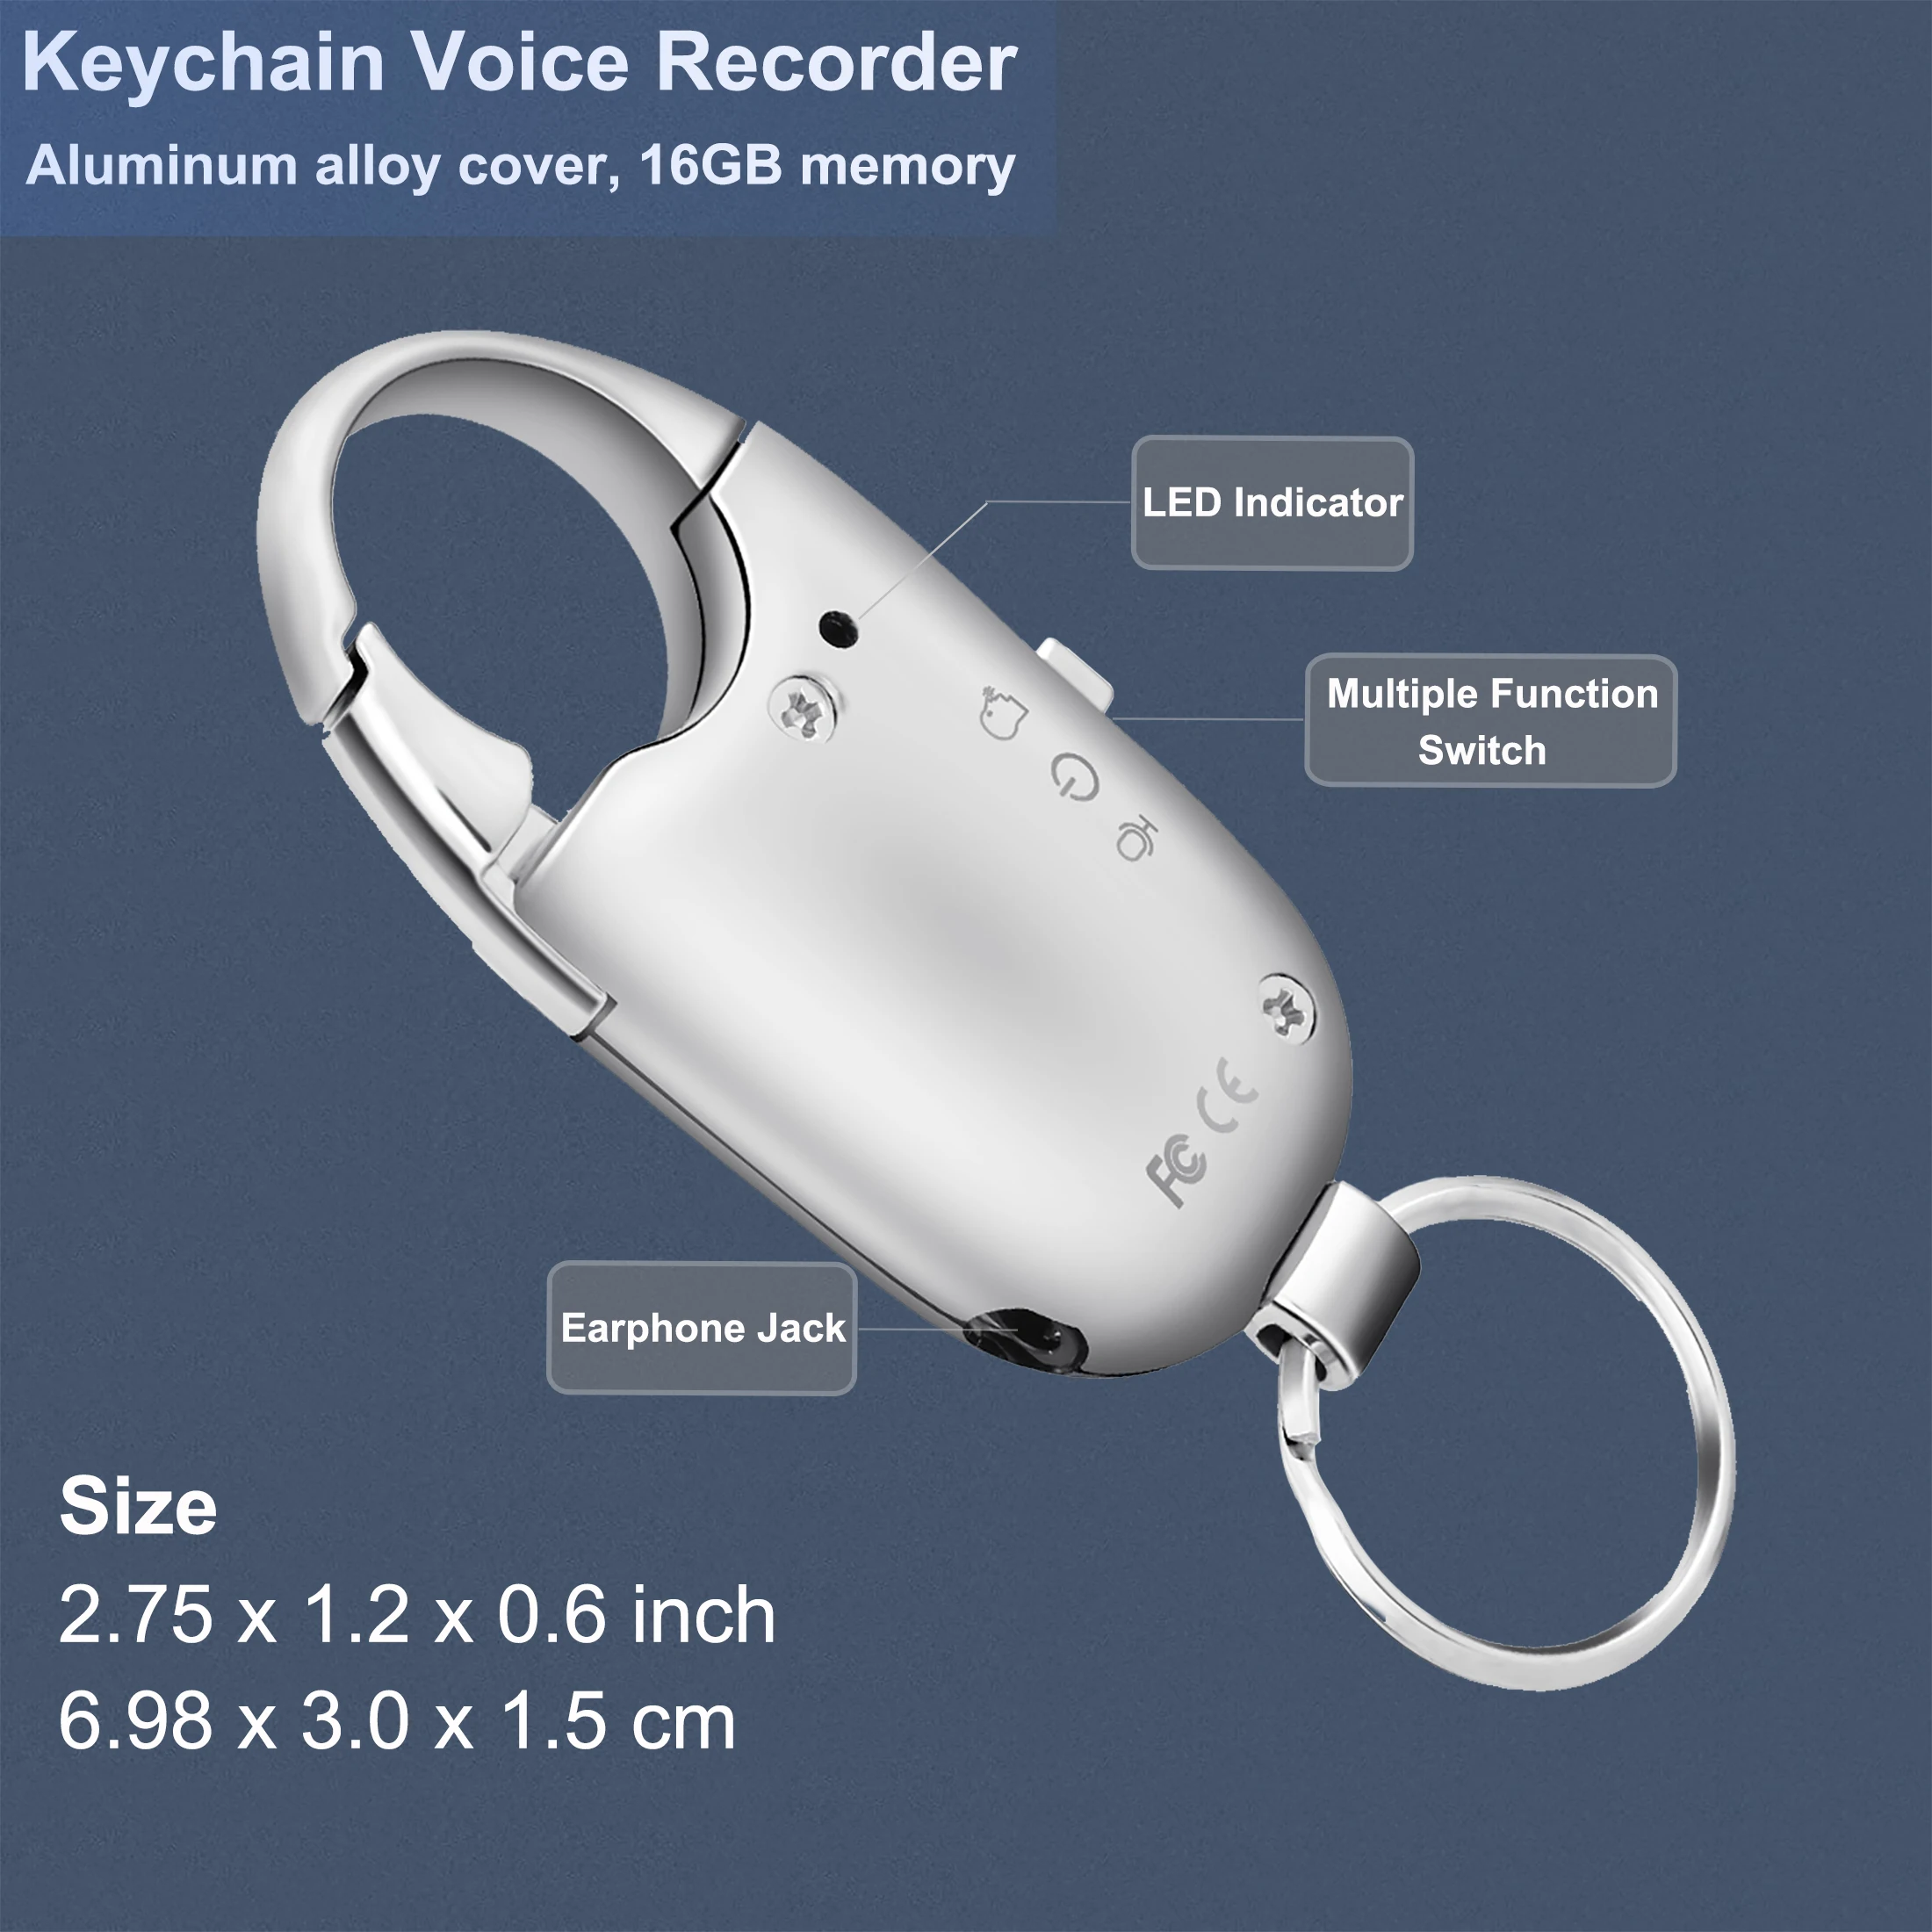 

Digital Voice Recorder Voice Activated Recording Intelligent Noise Reduction Mp3 Player Supports 15 hours of Recording 16GB